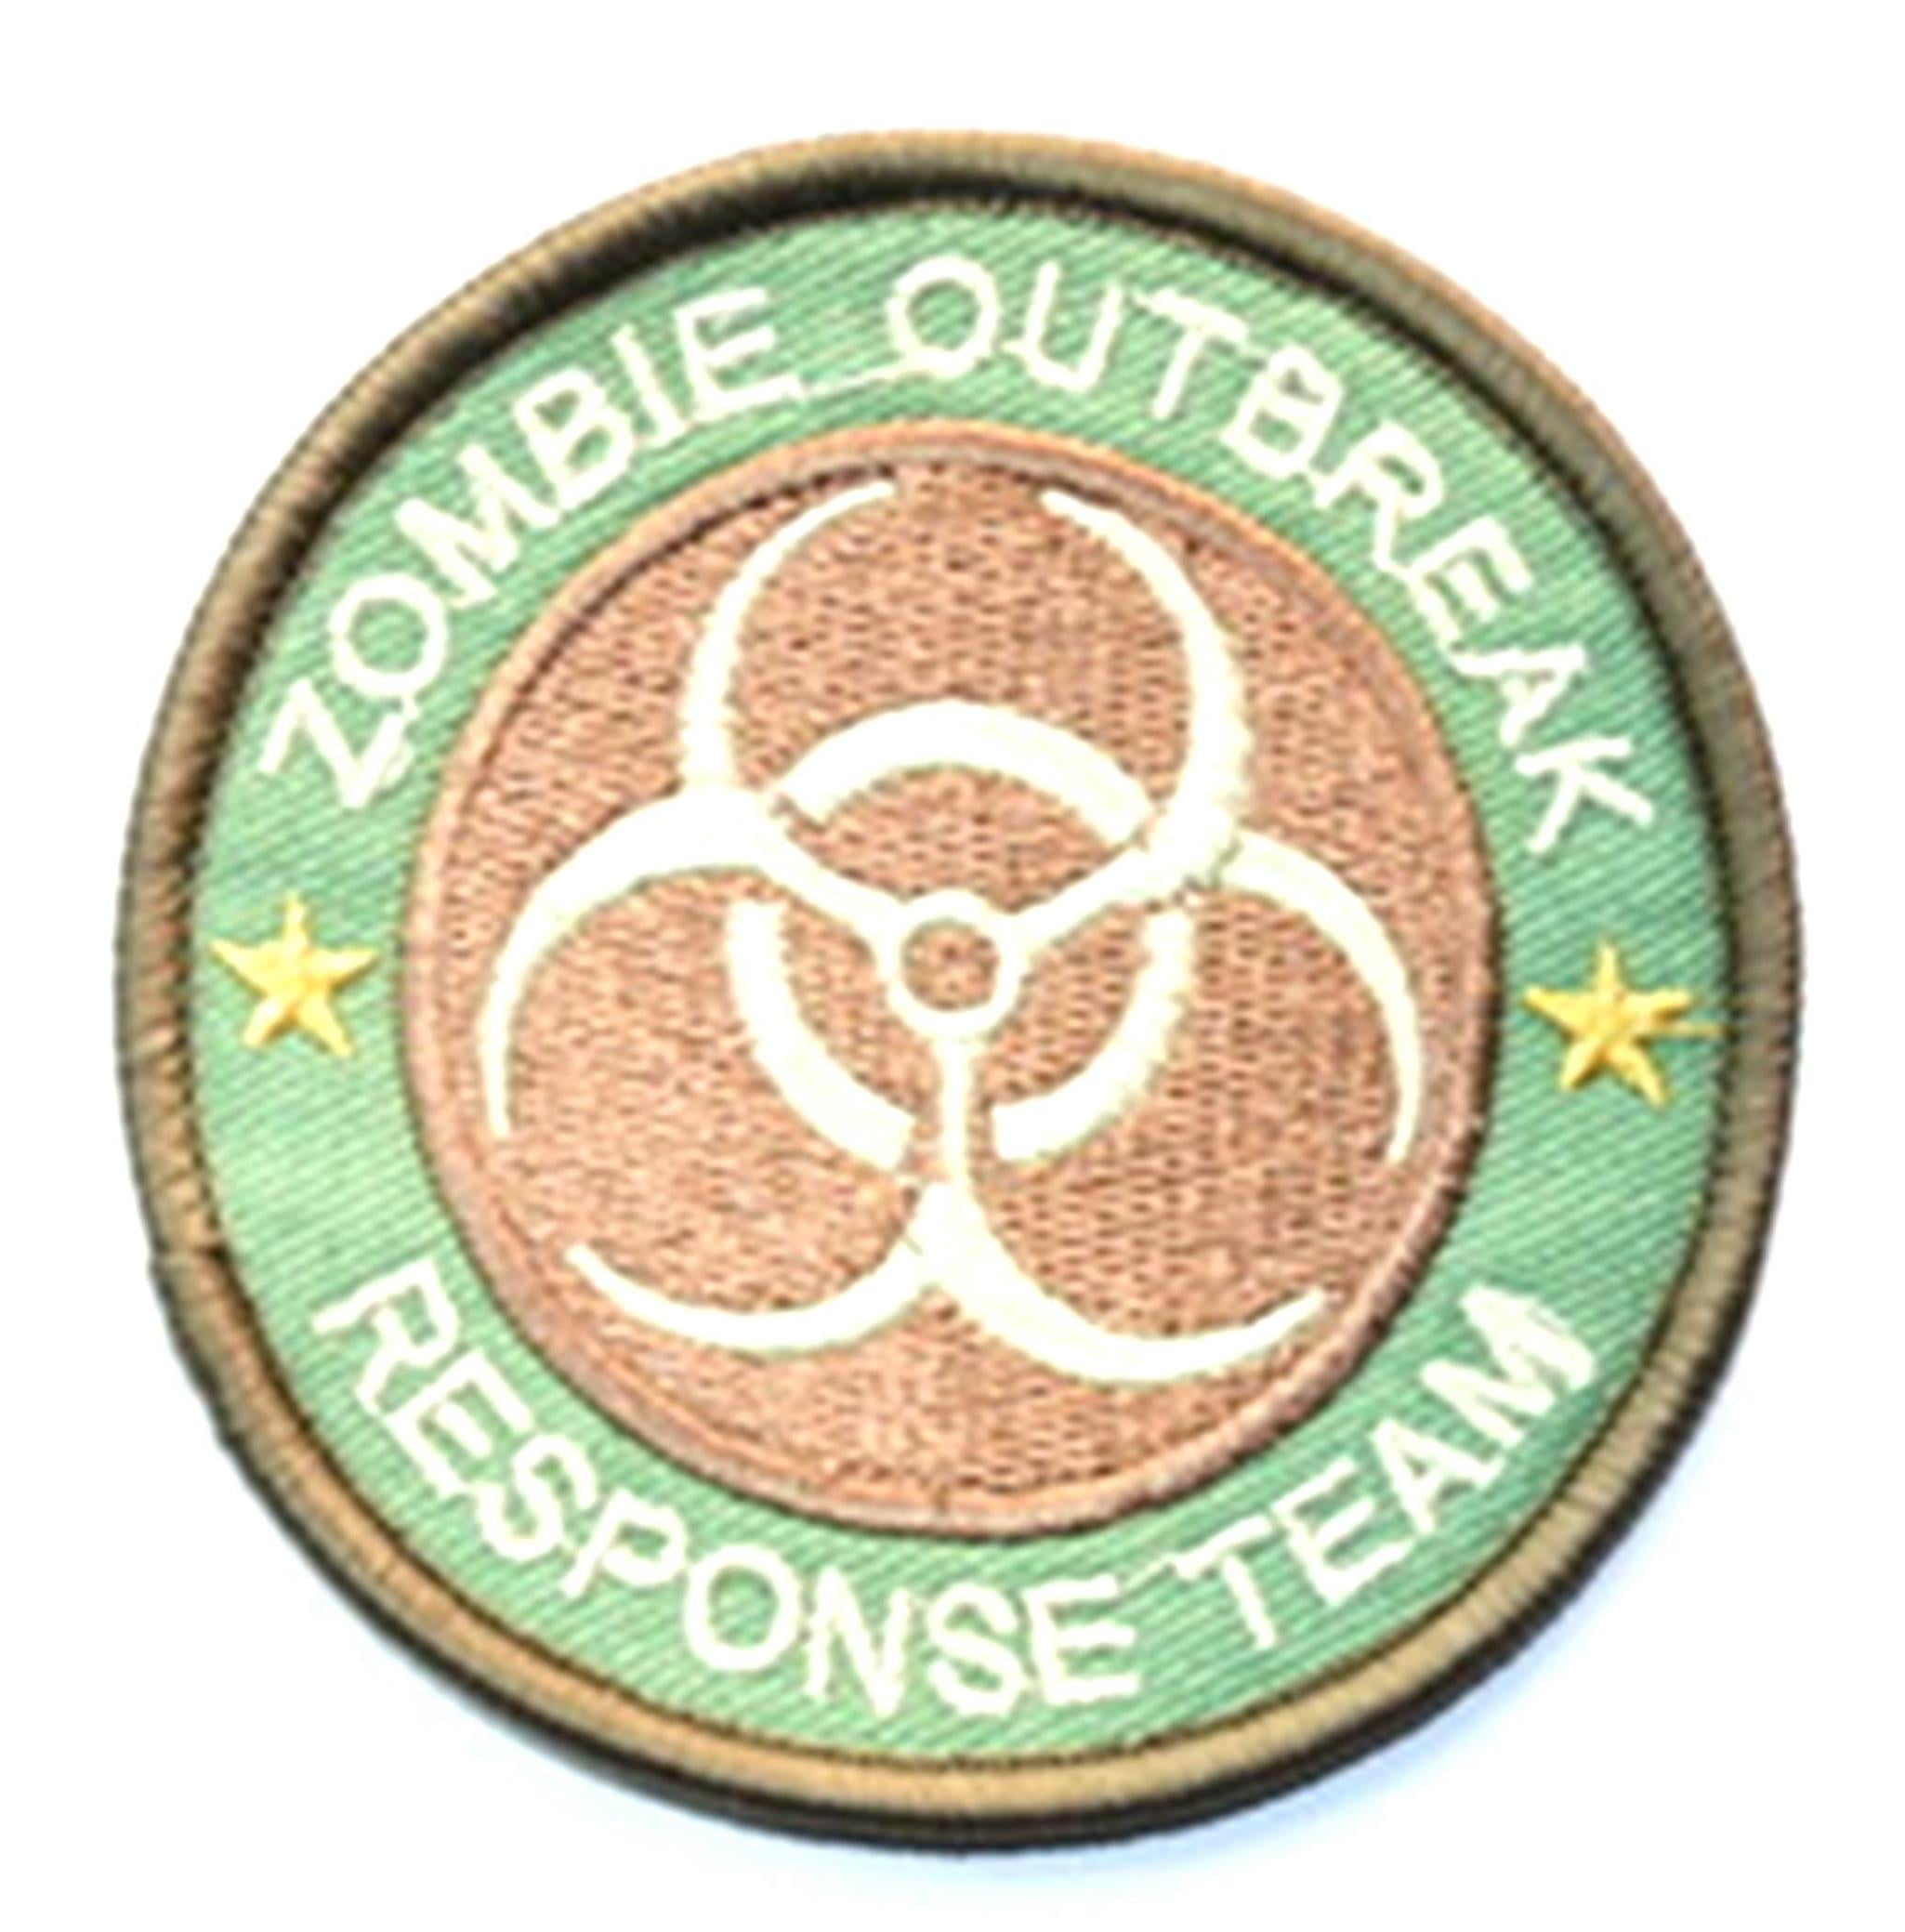 ZOMBIE OUTBREAK RESPONSE TEAM PATCH EMBROIDERED IRON OR SEW ON APPLIQUE BADGE 